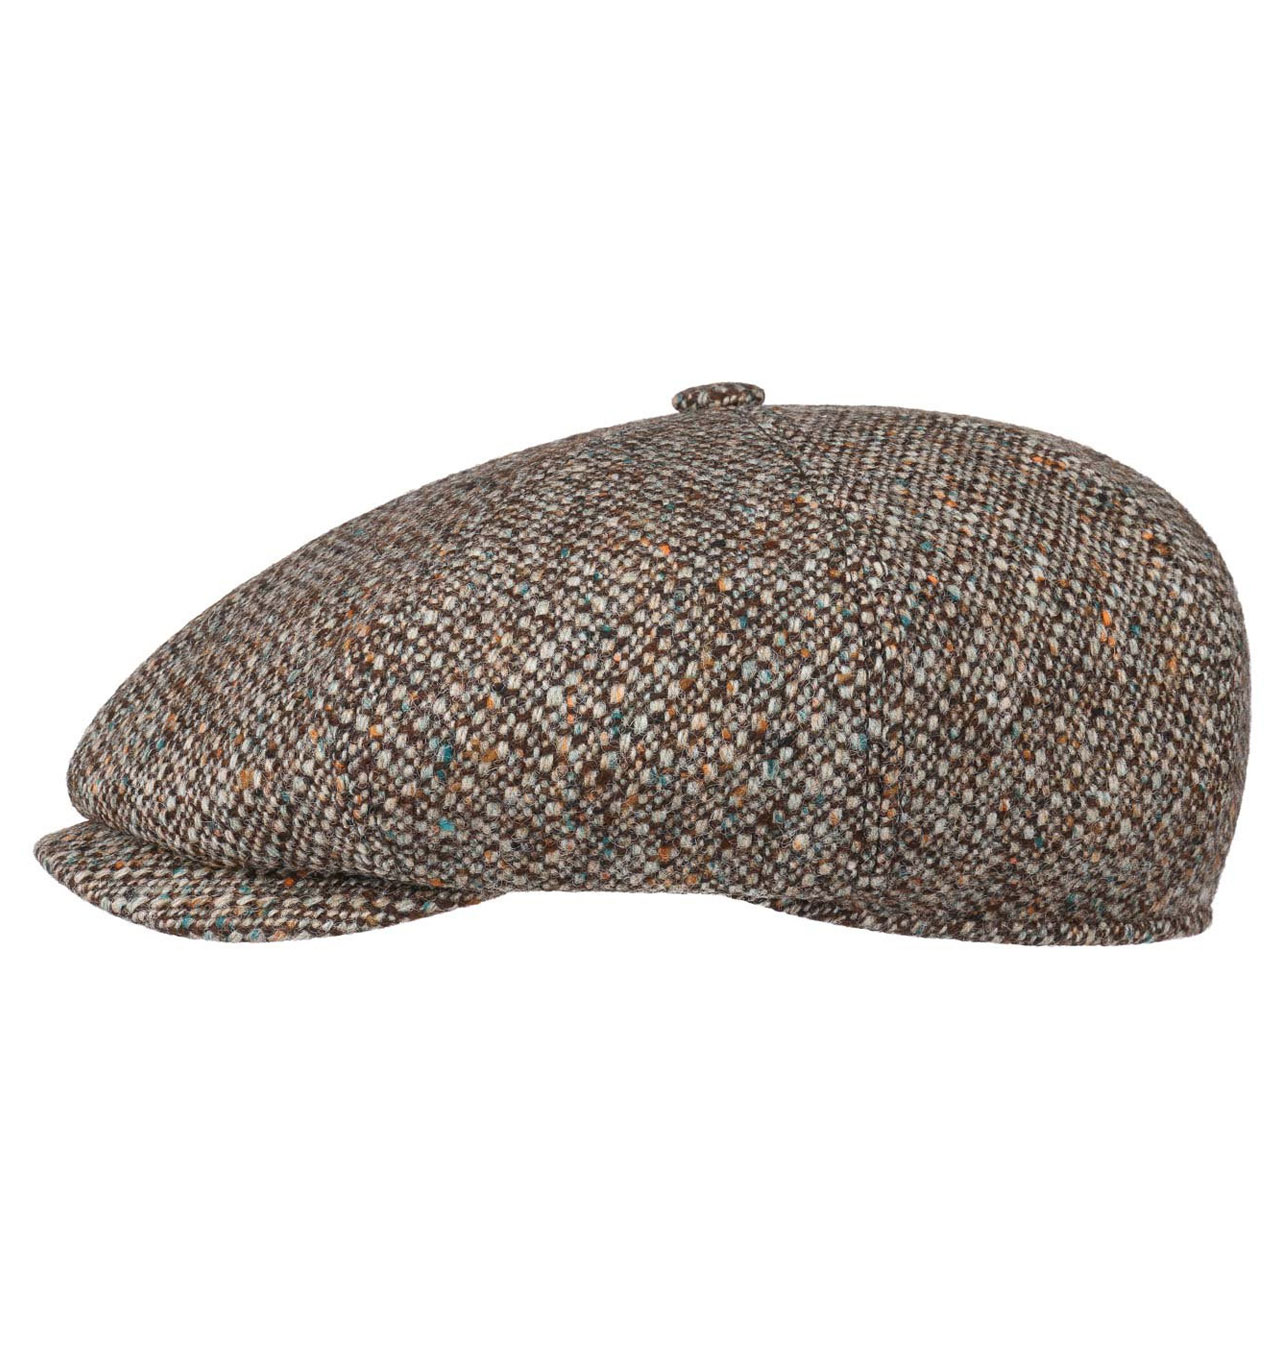 Stetson - Many Wool Newsboy Cap Colour Neps - Brown/Beige